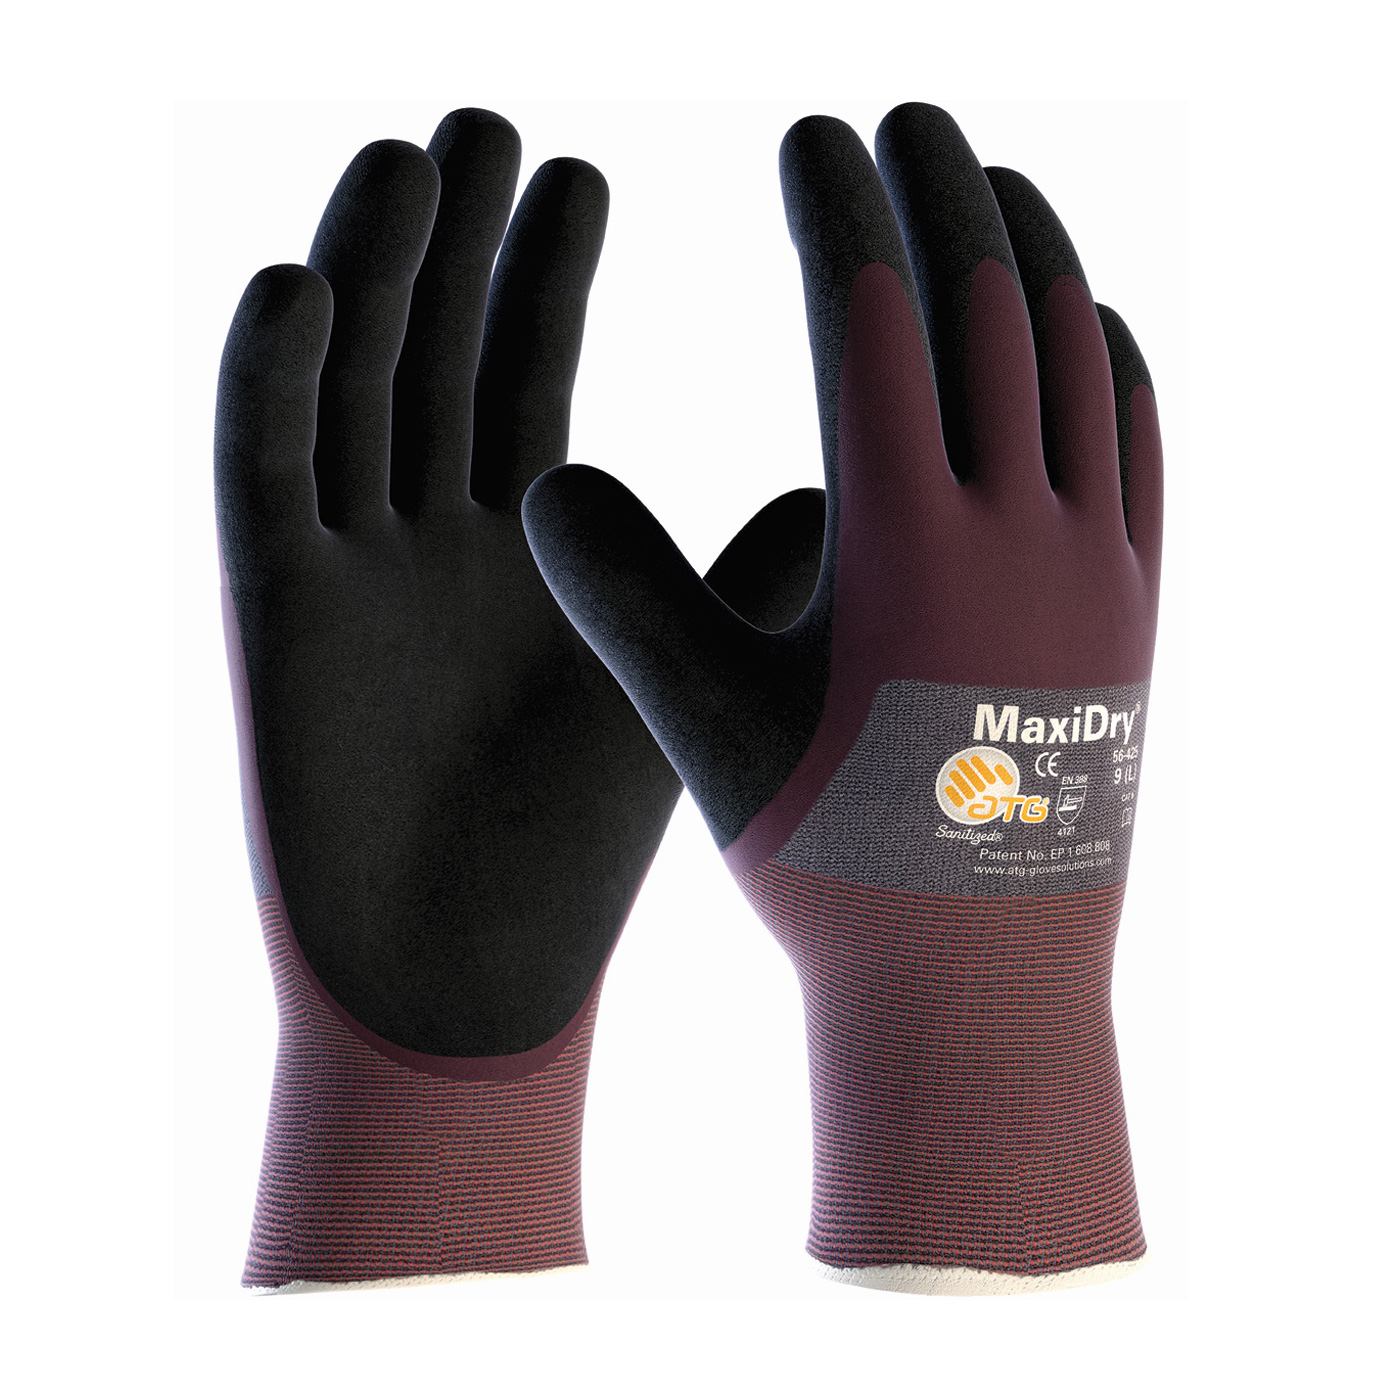 PIP 56-425/L MaxiDry Ultra Lightweight Nitrile Glove, Palm Dipped with Seamless Knit Nylon/Lycra Liner and Non-Slip Grip on Palm & Fingers - Large PID-56 425 L